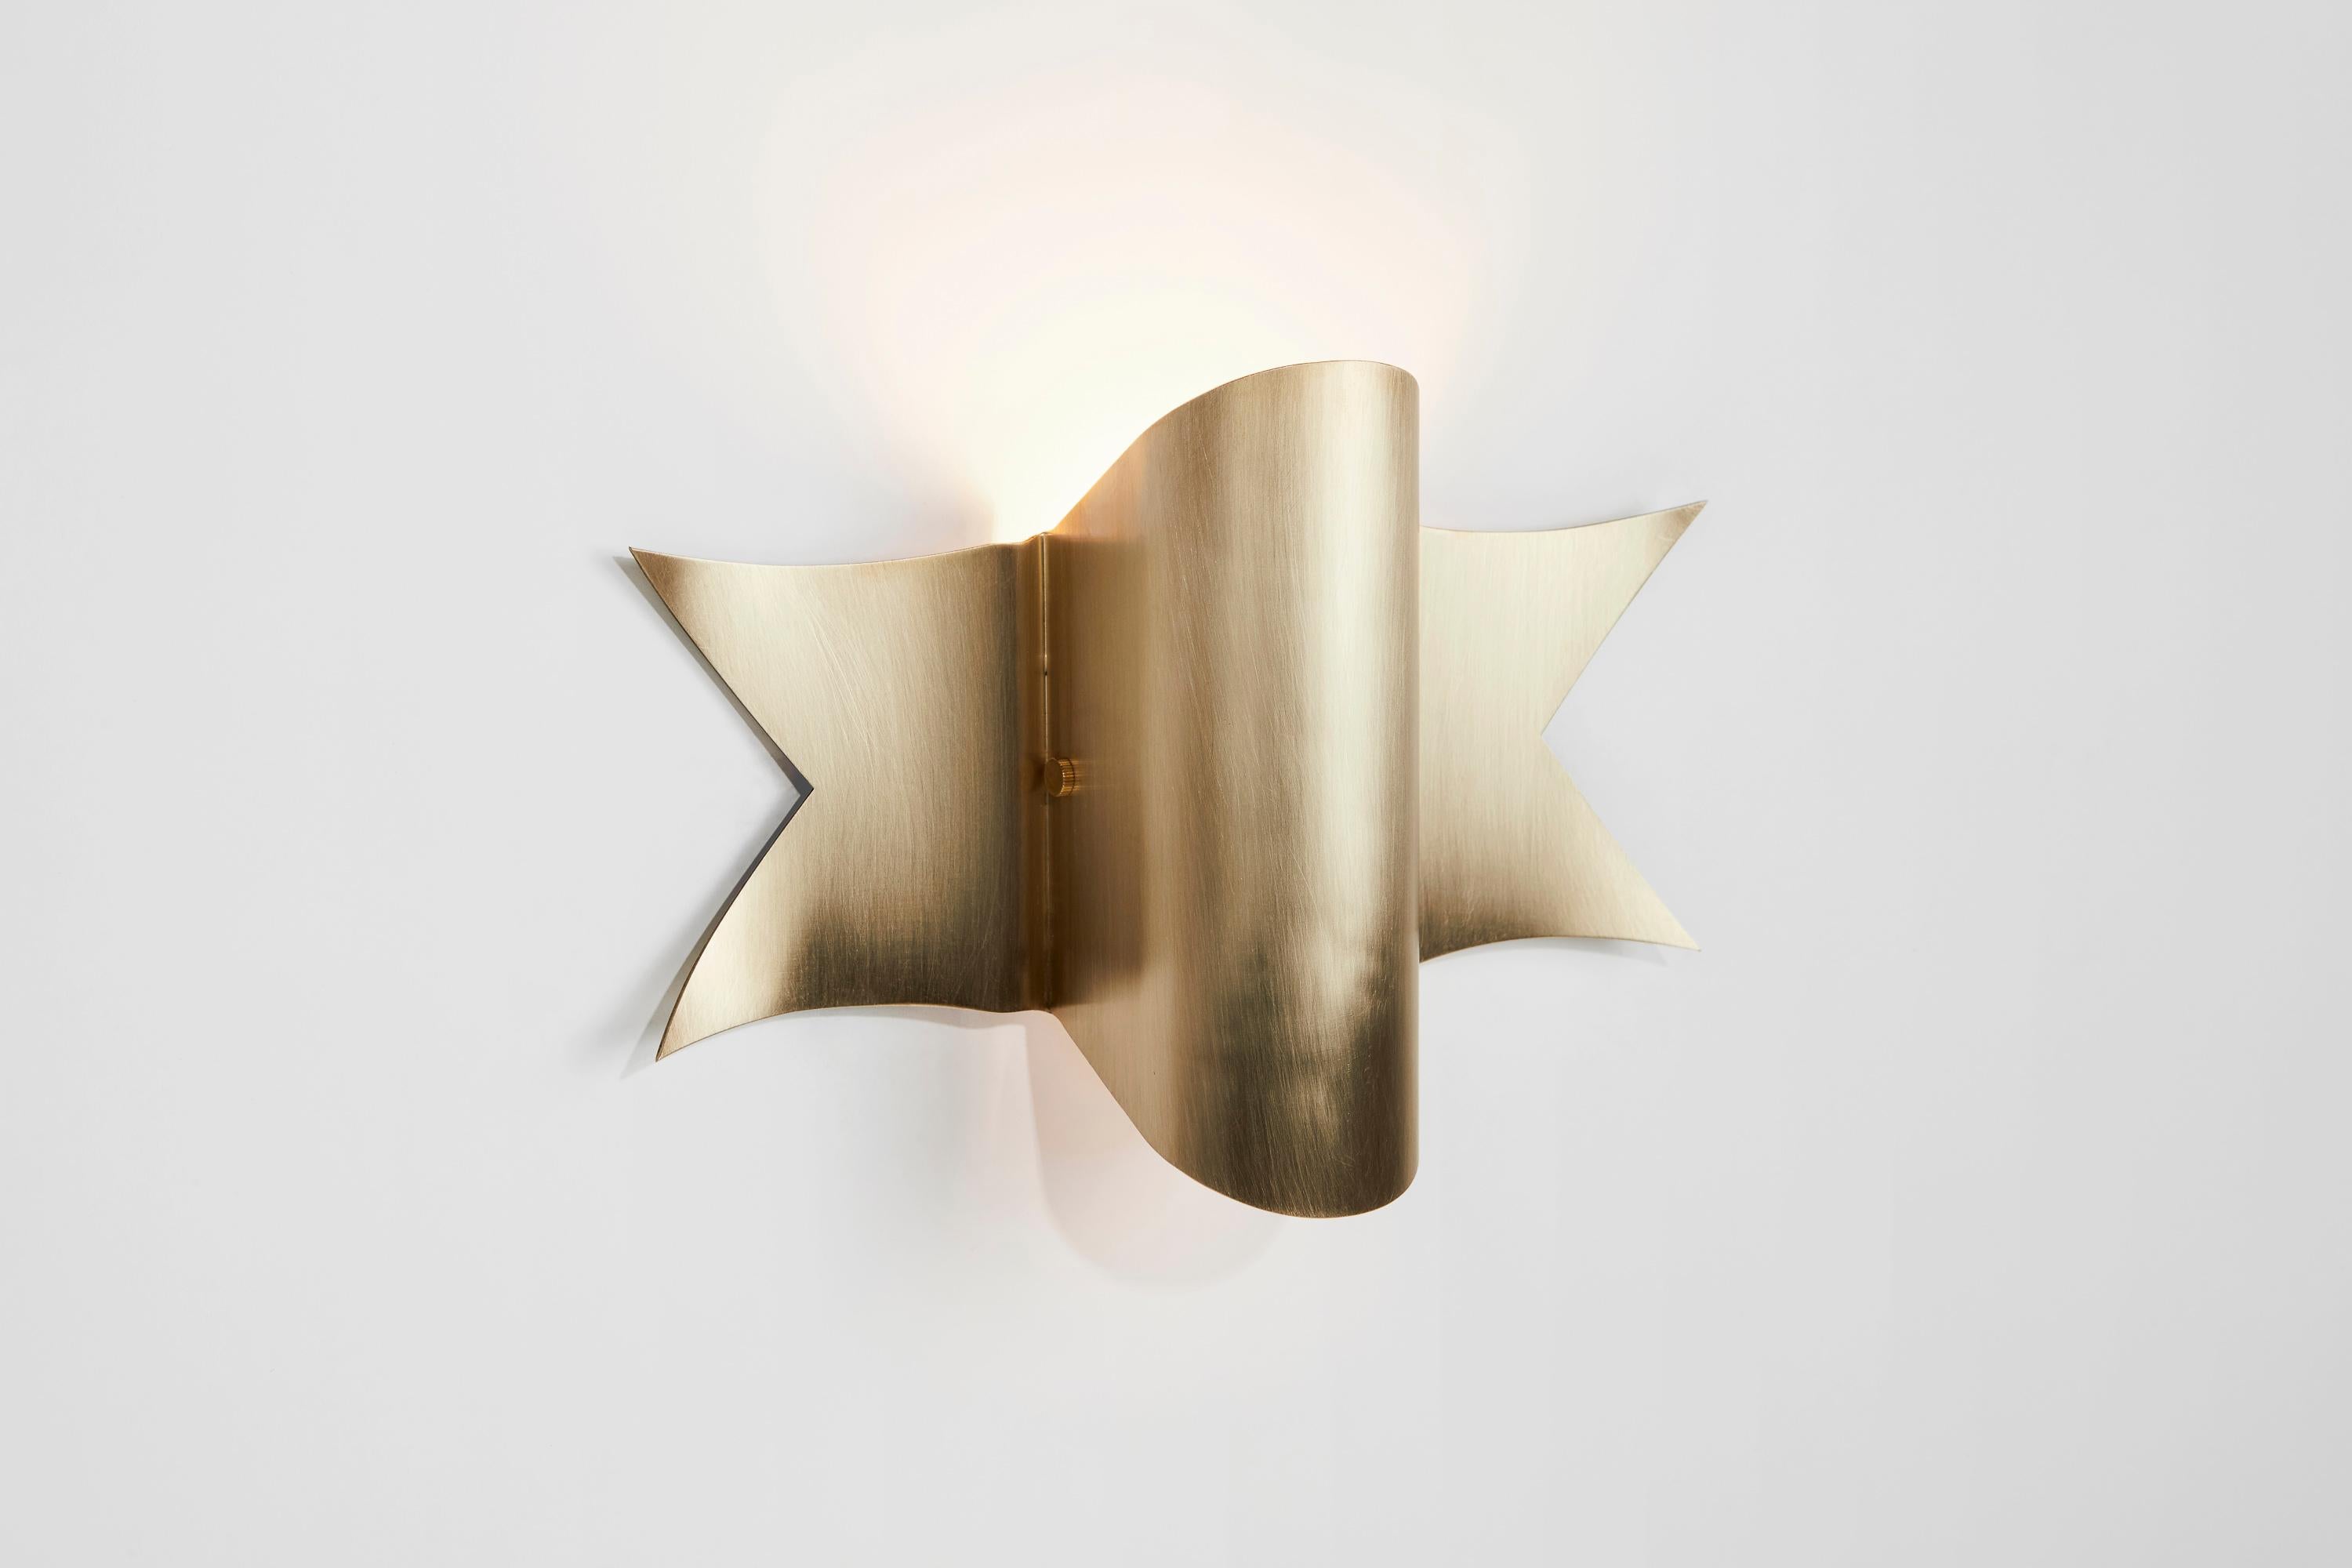 Banner reimagines the ribbons depicted in classic 1930s and 40s military tattoos. This fabric form replicated in a stainless steel sconce captures a tension between the masculine and the feminine. Banner is offered in stainless steel or solid brass